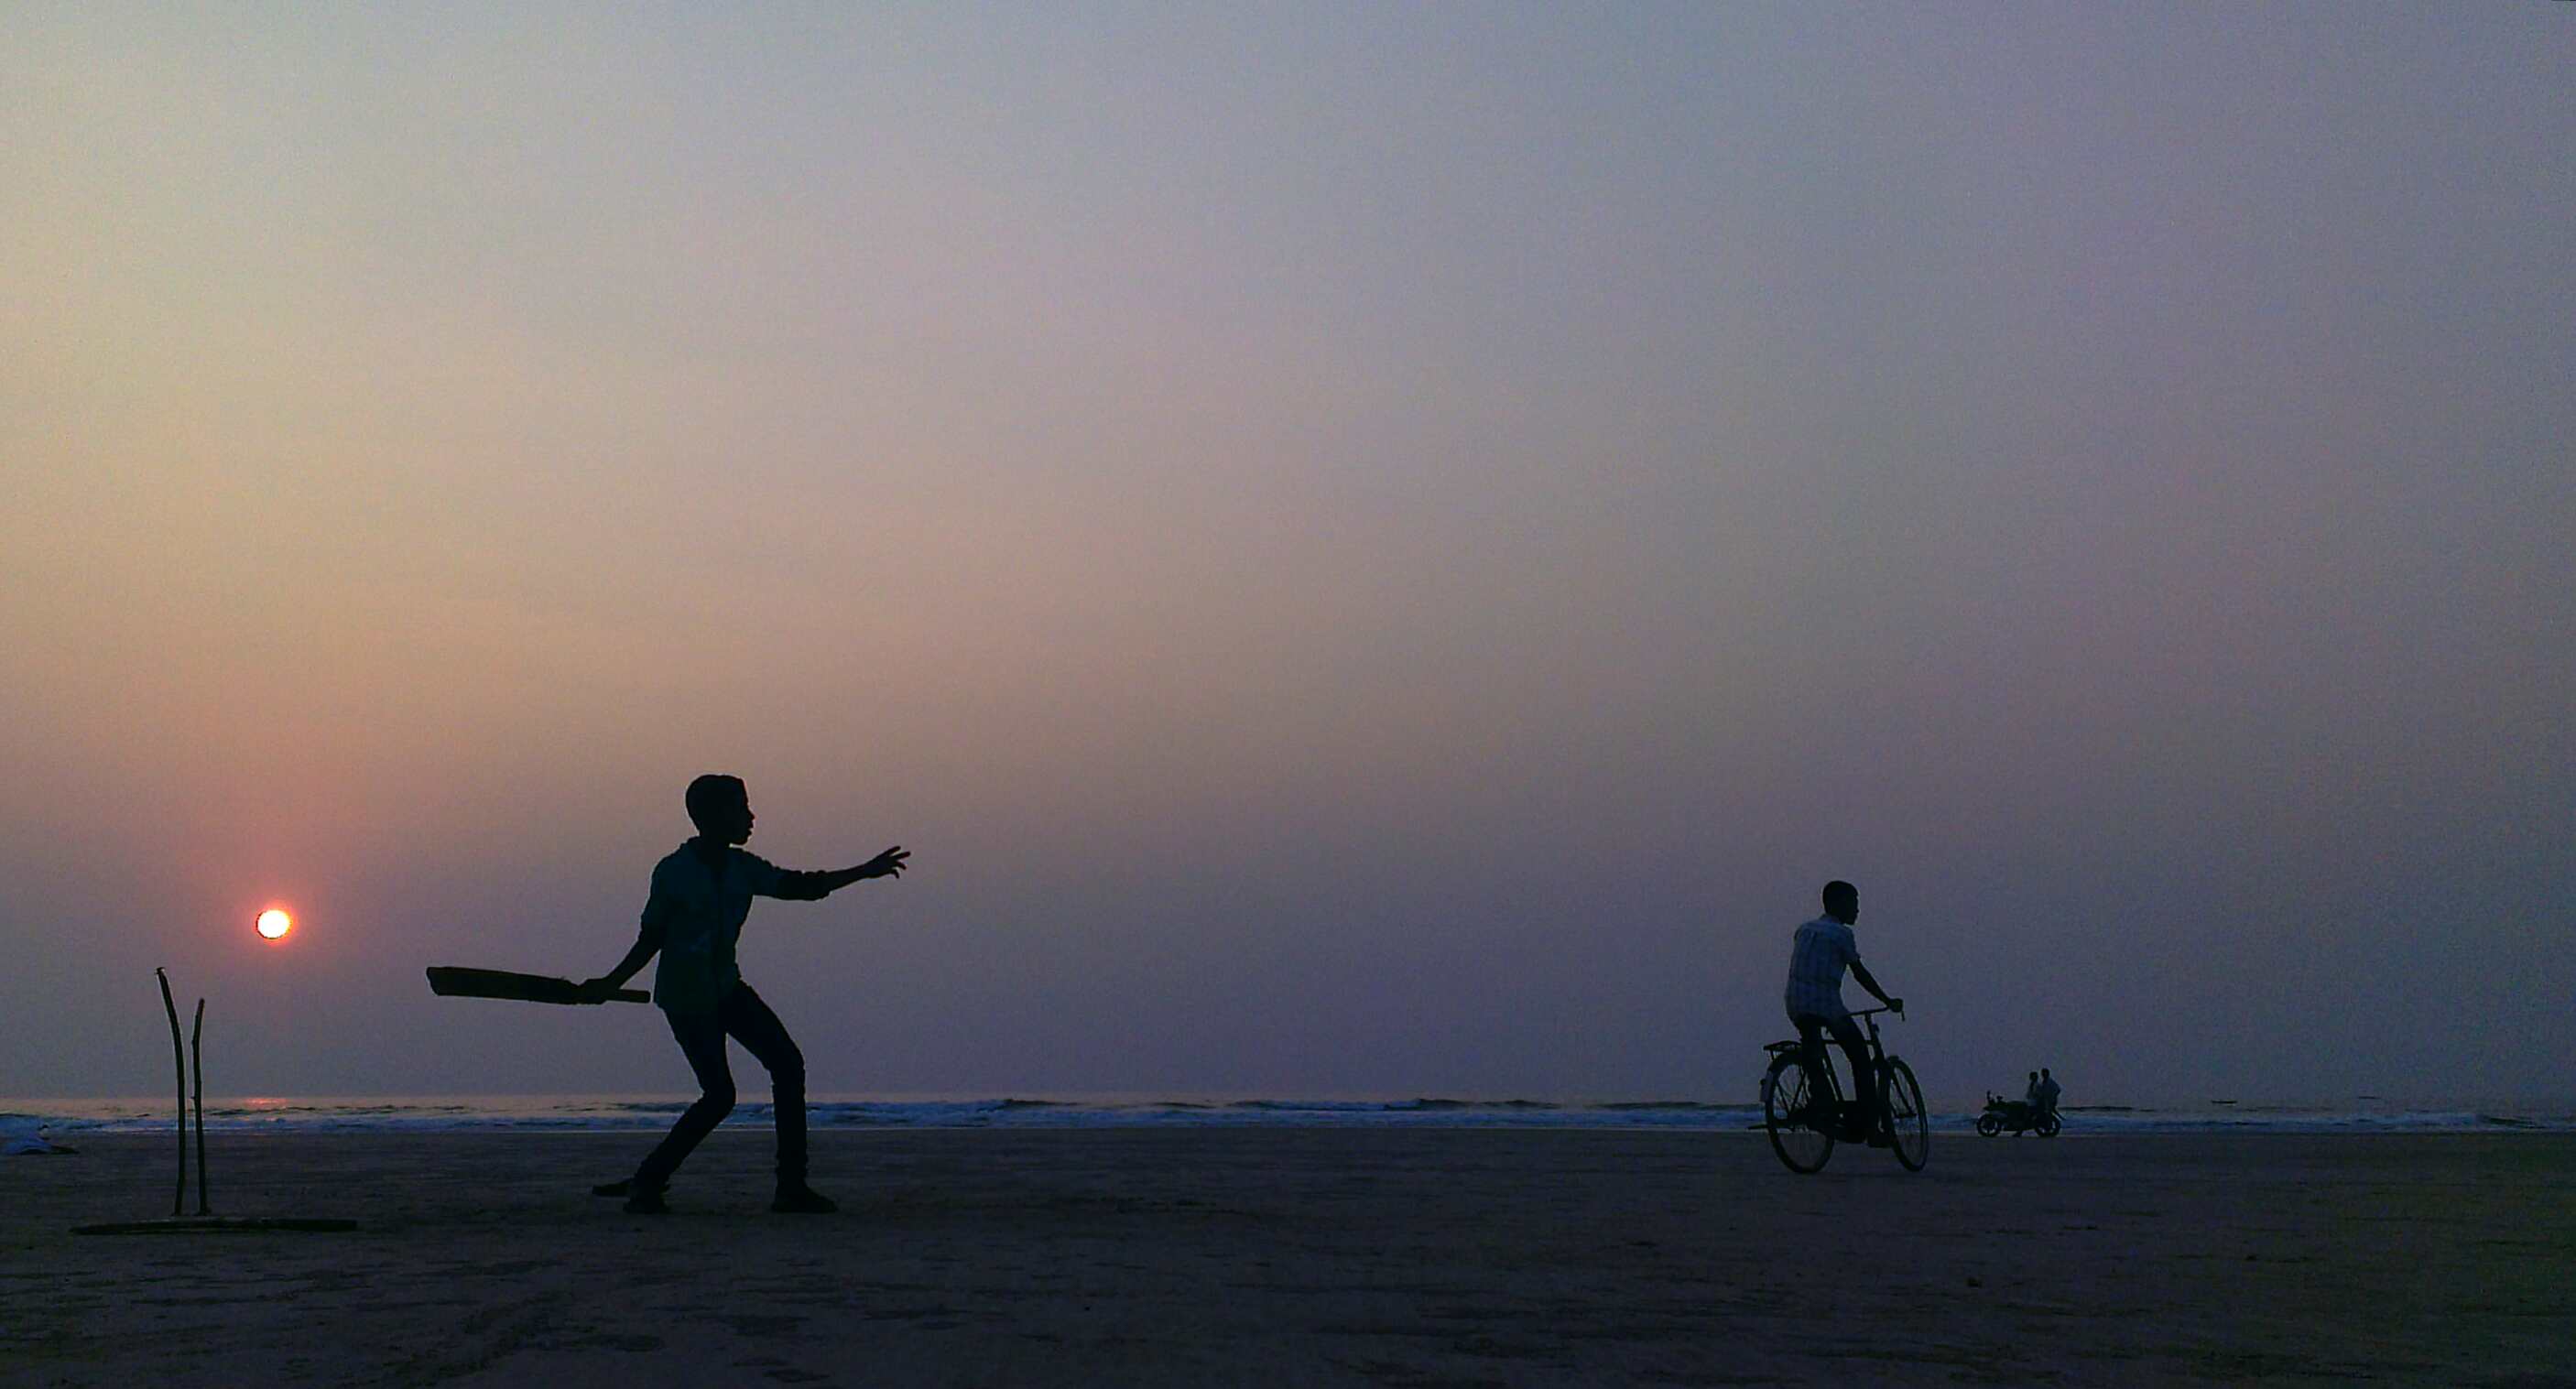 Day 11 playing cricket on the beach at sunset